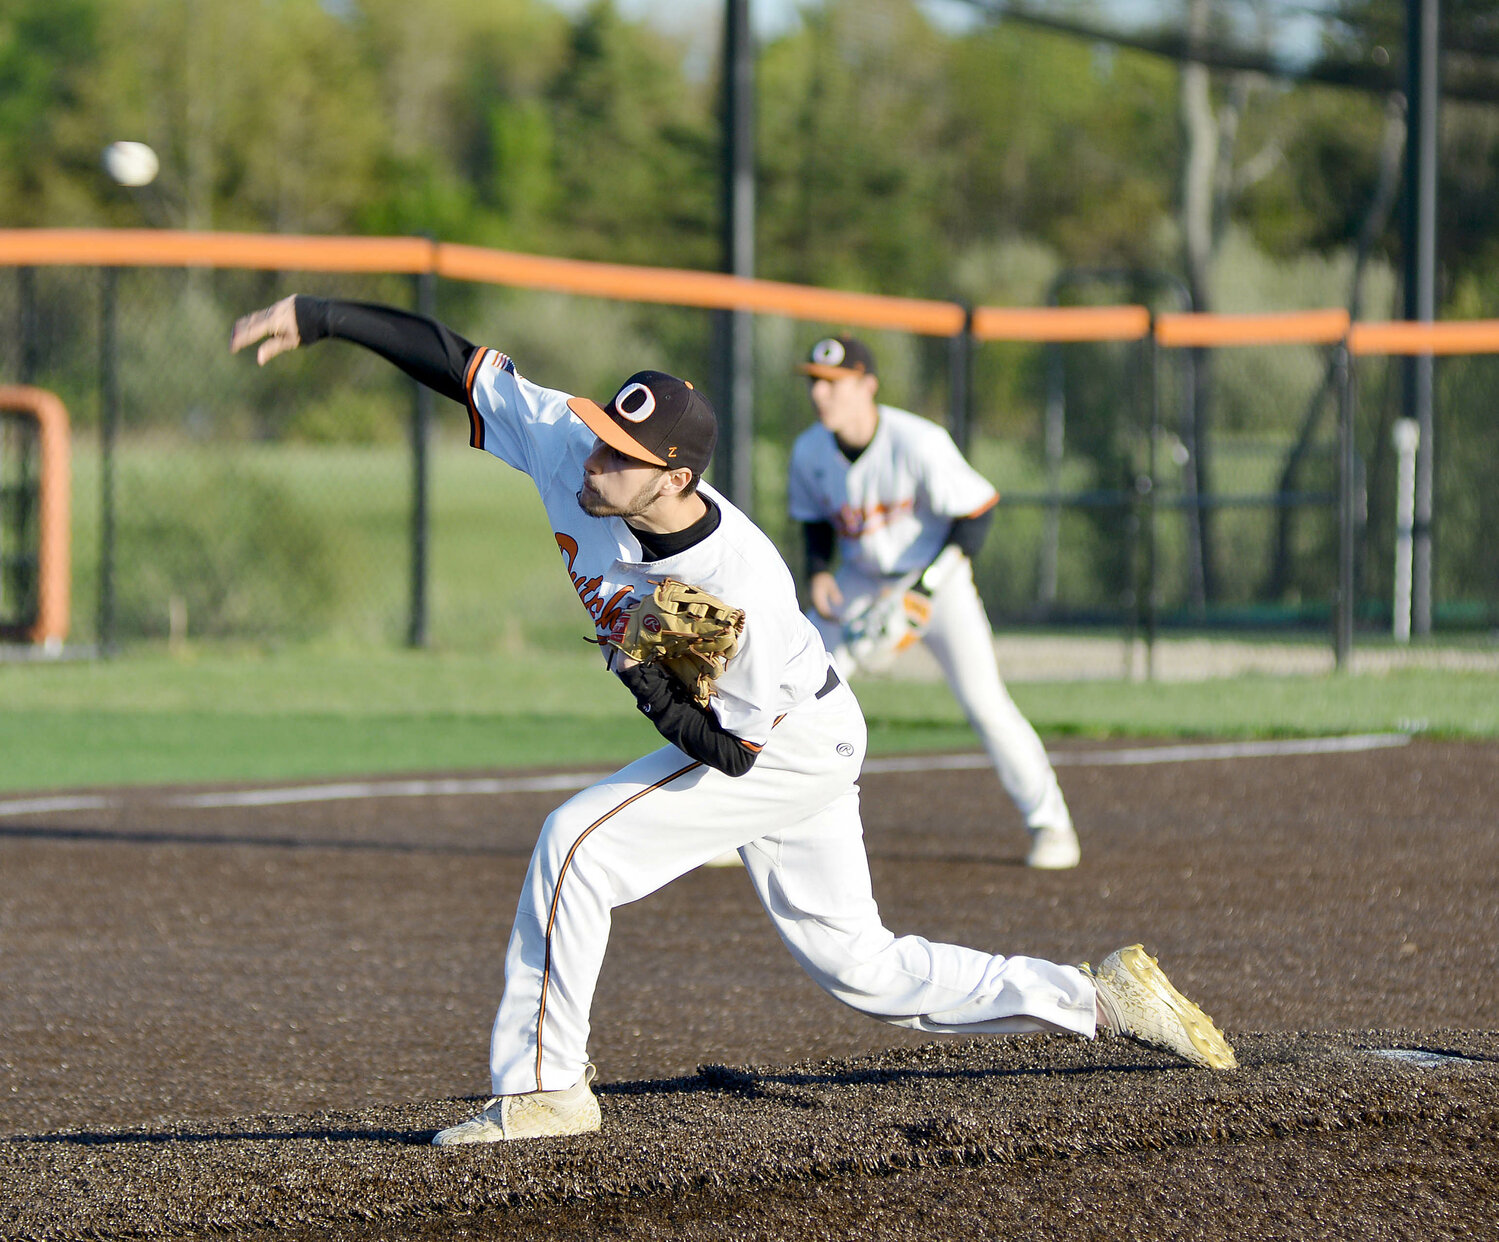 JJ Brown (center) delivers one of his 73 pitches for Owensville’s Dutchmen during senior-night baseball action last Tuesday at OHS Field against Vienna’s Eagles. Brown helped the Dutchmen score a road victory Monday night by a 10-7 final score in Steelville. Hosting Cuba last night (Tuesday), OHS closes their regular season tomorrow (Thursday) at Waynesville before opening district play Saturday.